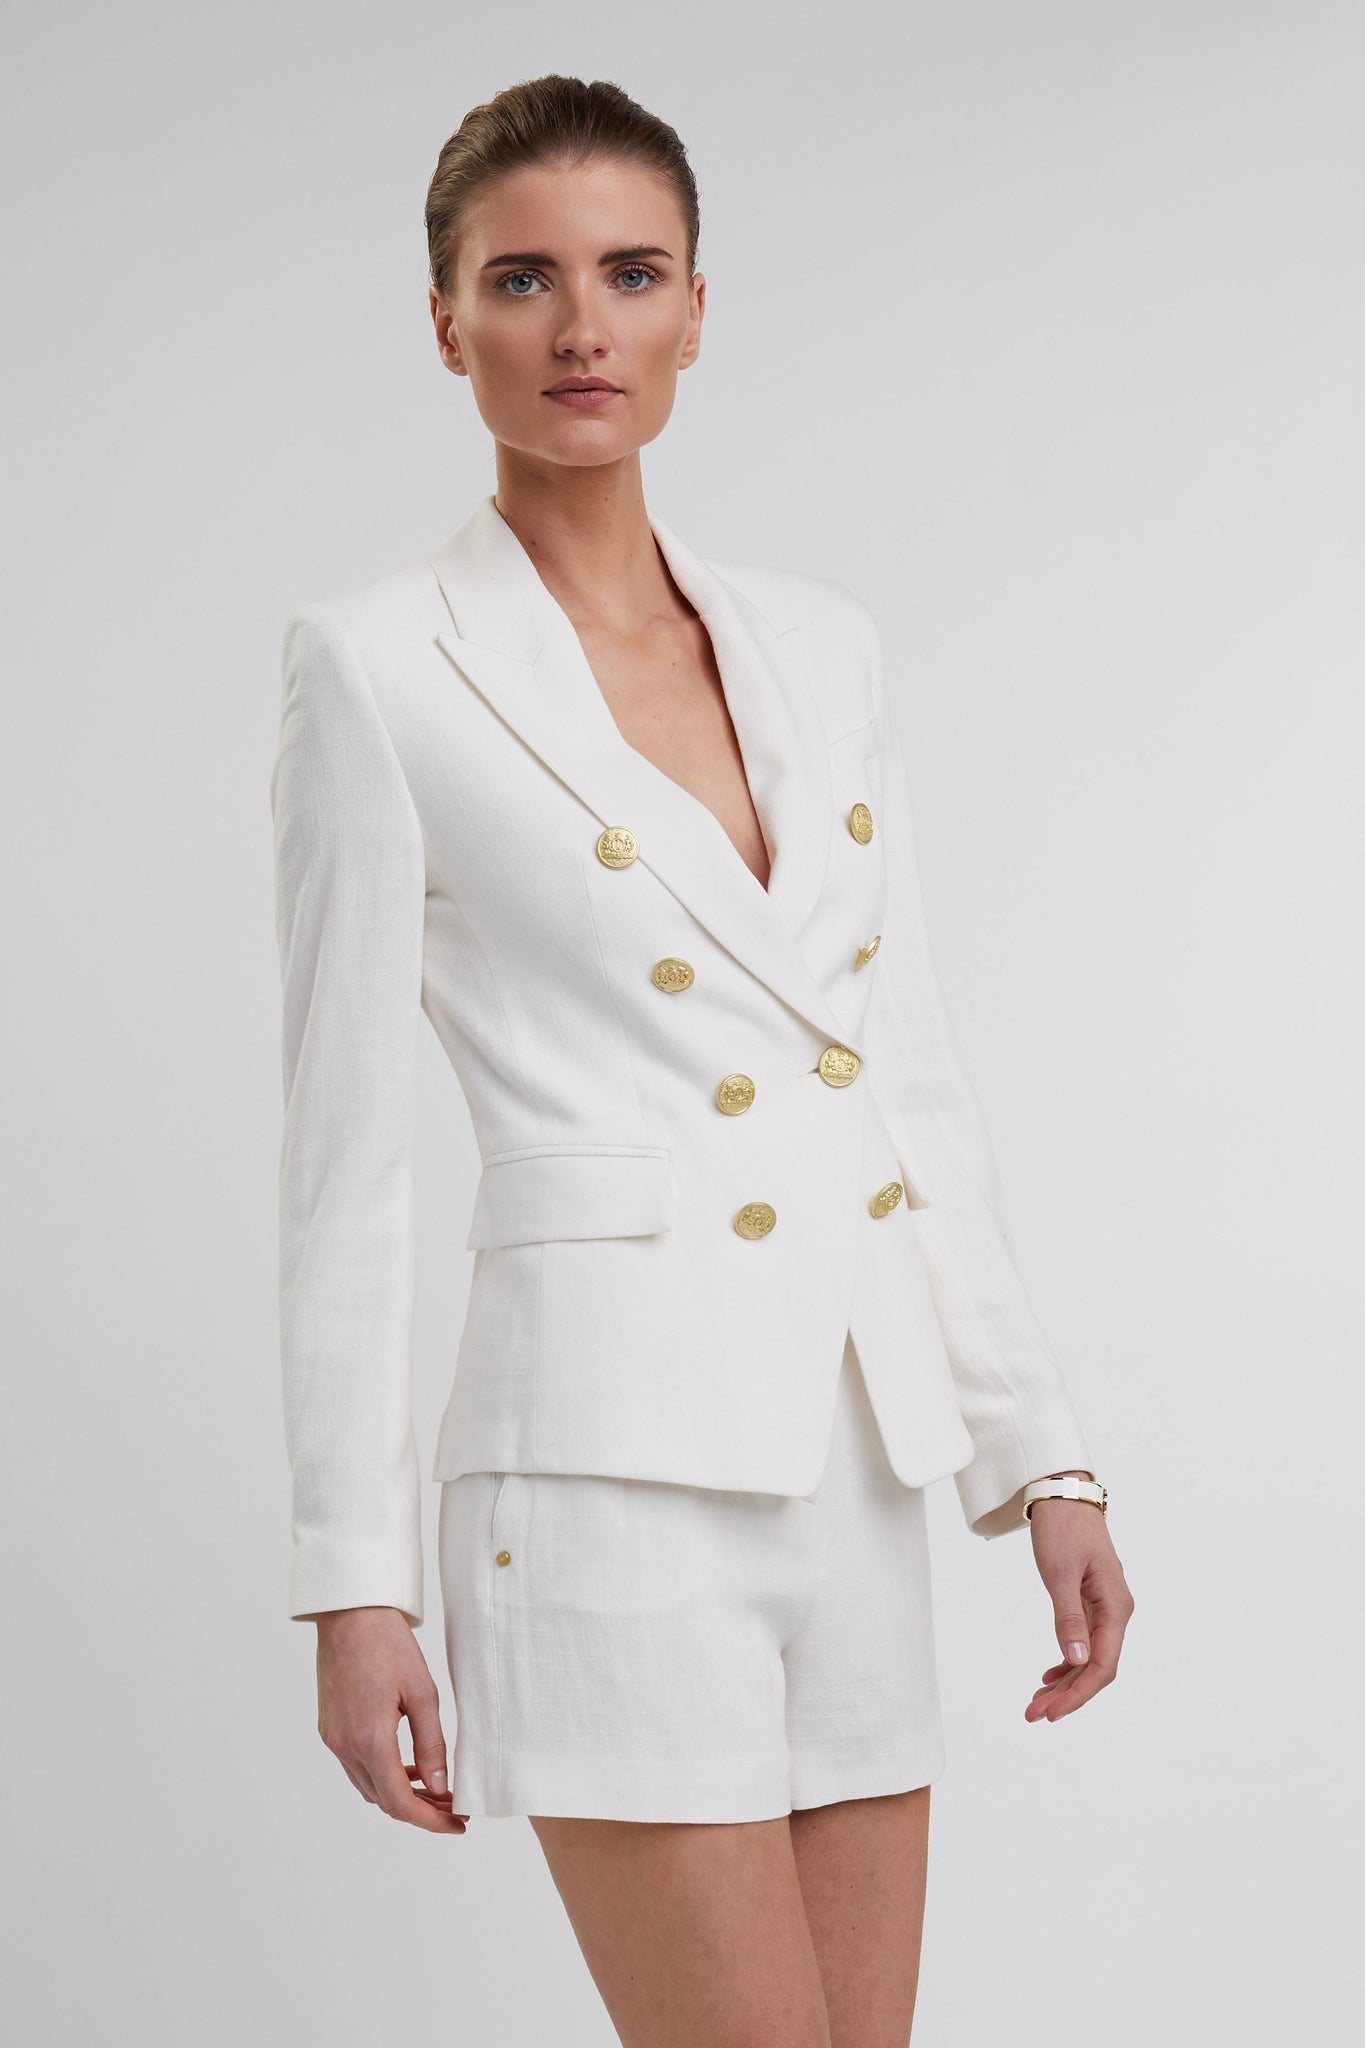 The Oyster Linen Suit (Oyster Linen)